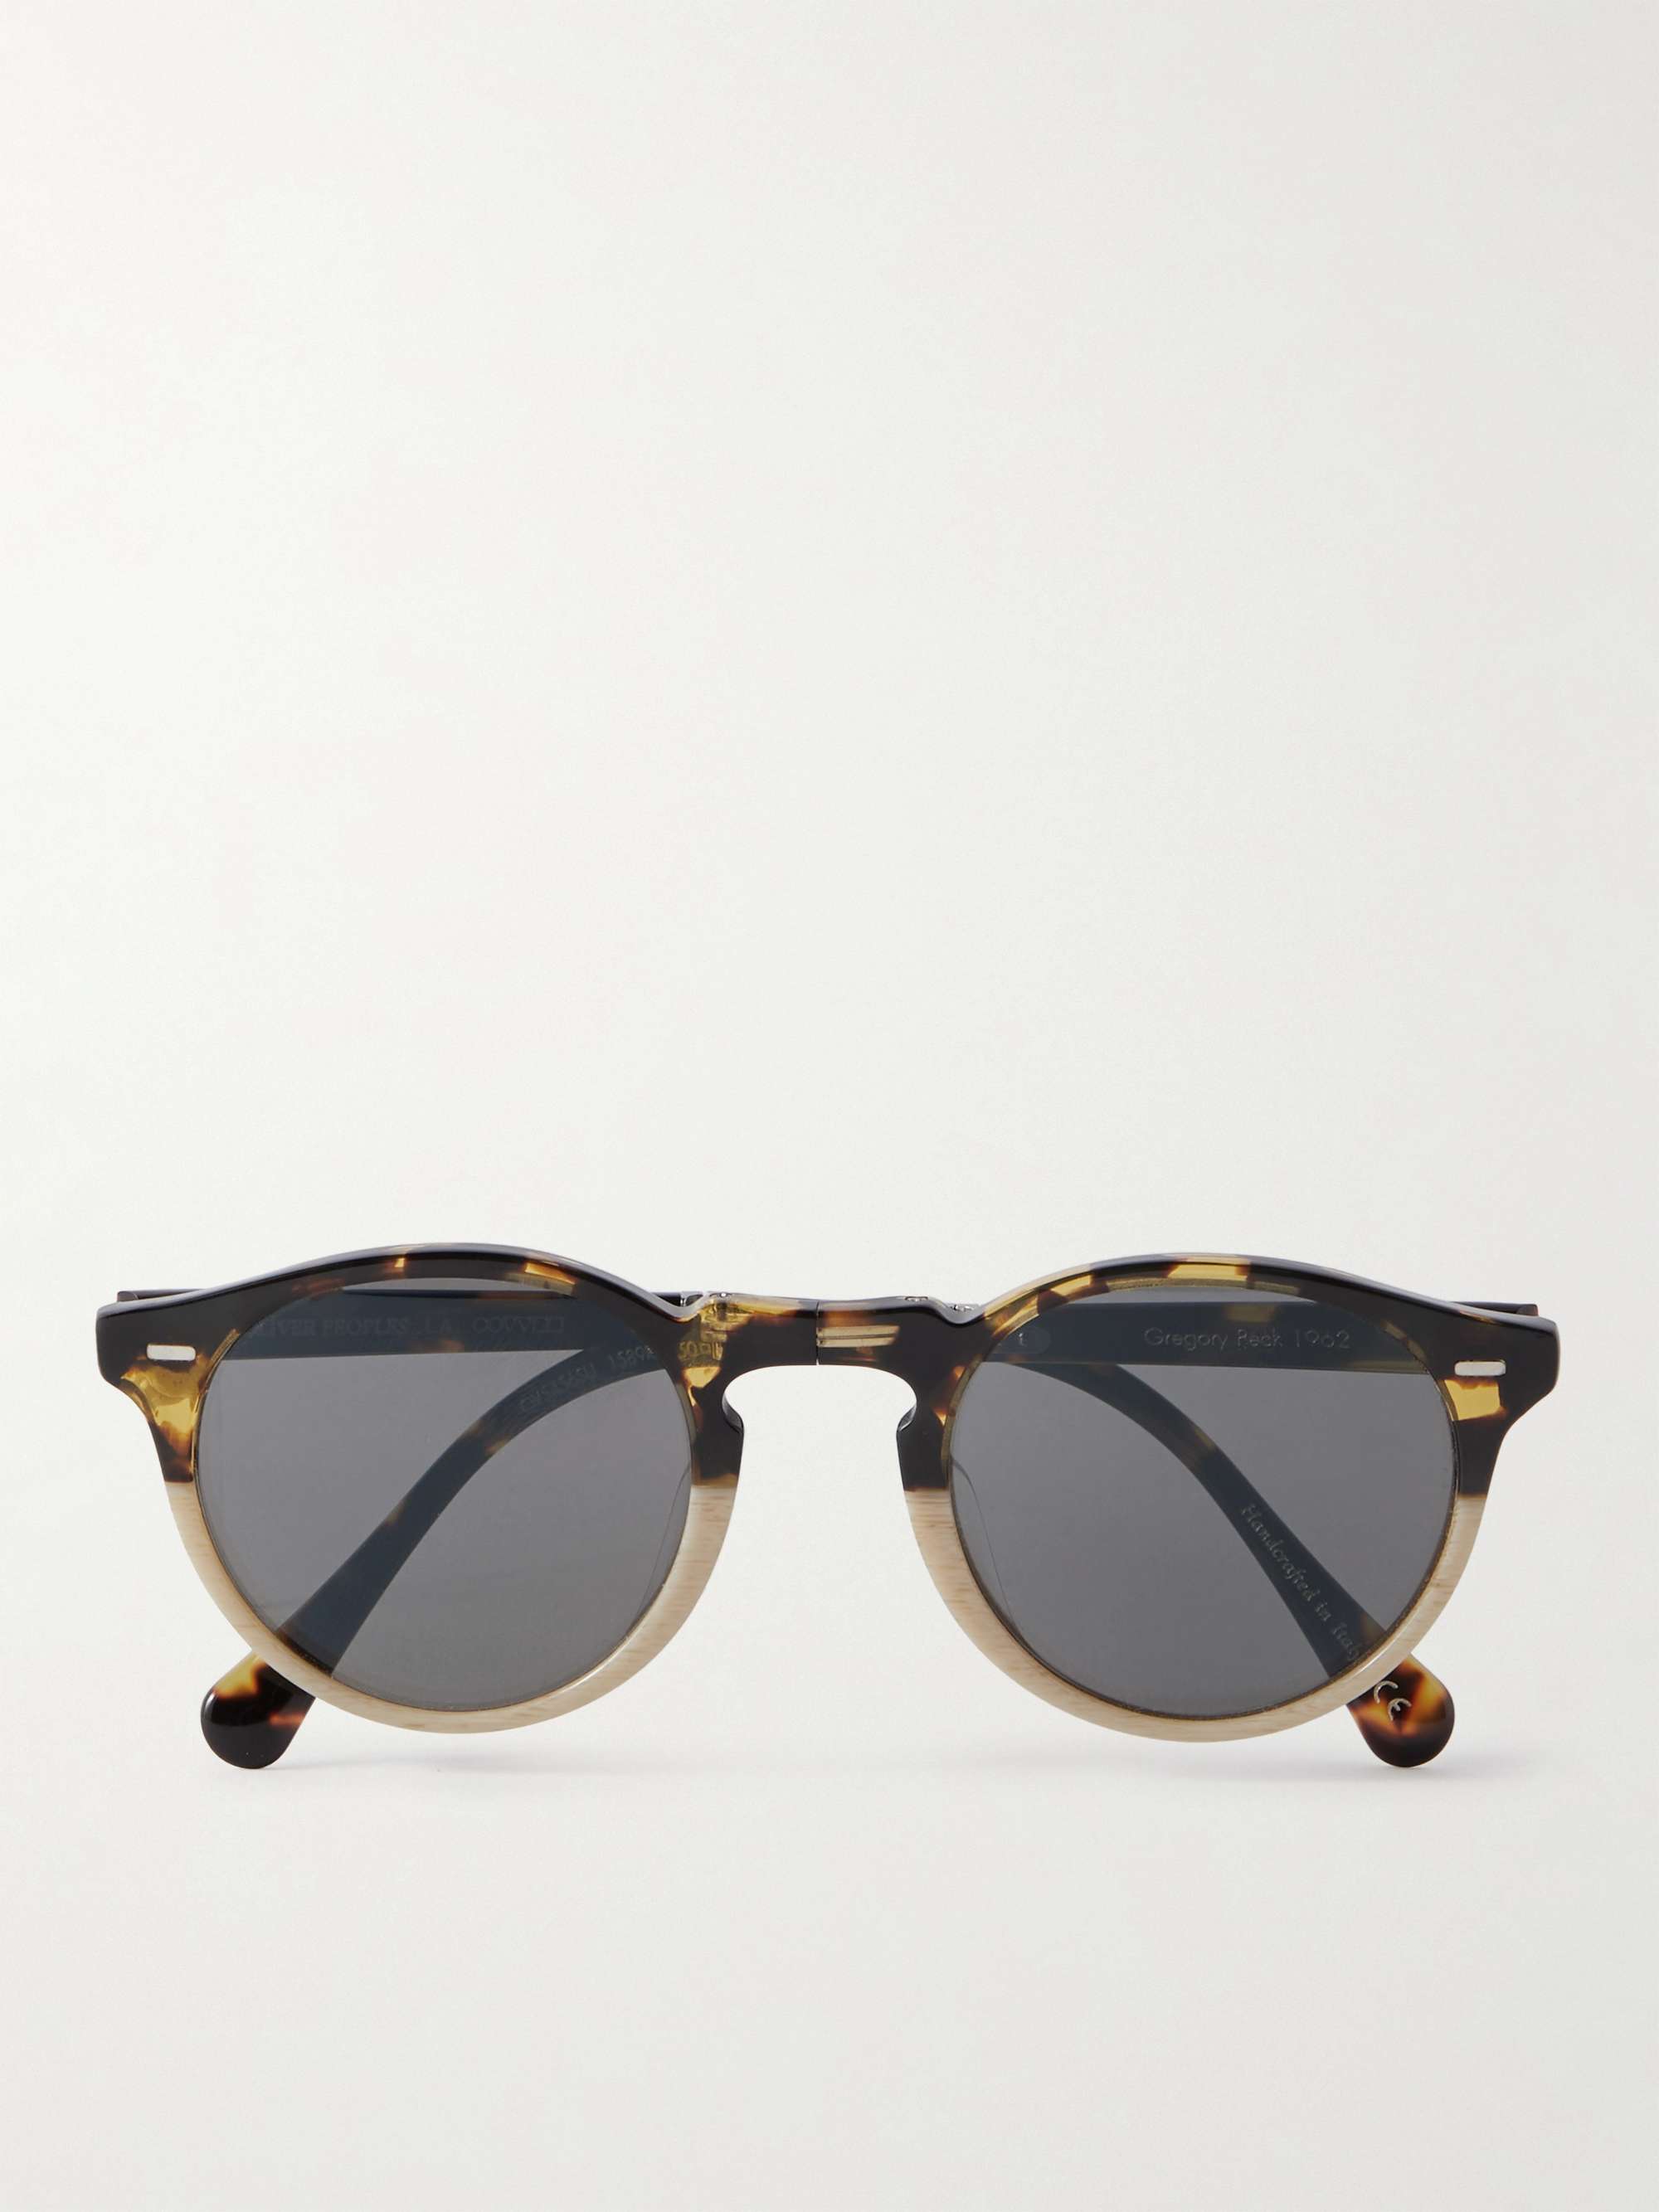 OLIVER PEOPLES Gregory Peck 1962 Foldable Round-Frame Acetate Sunglasses